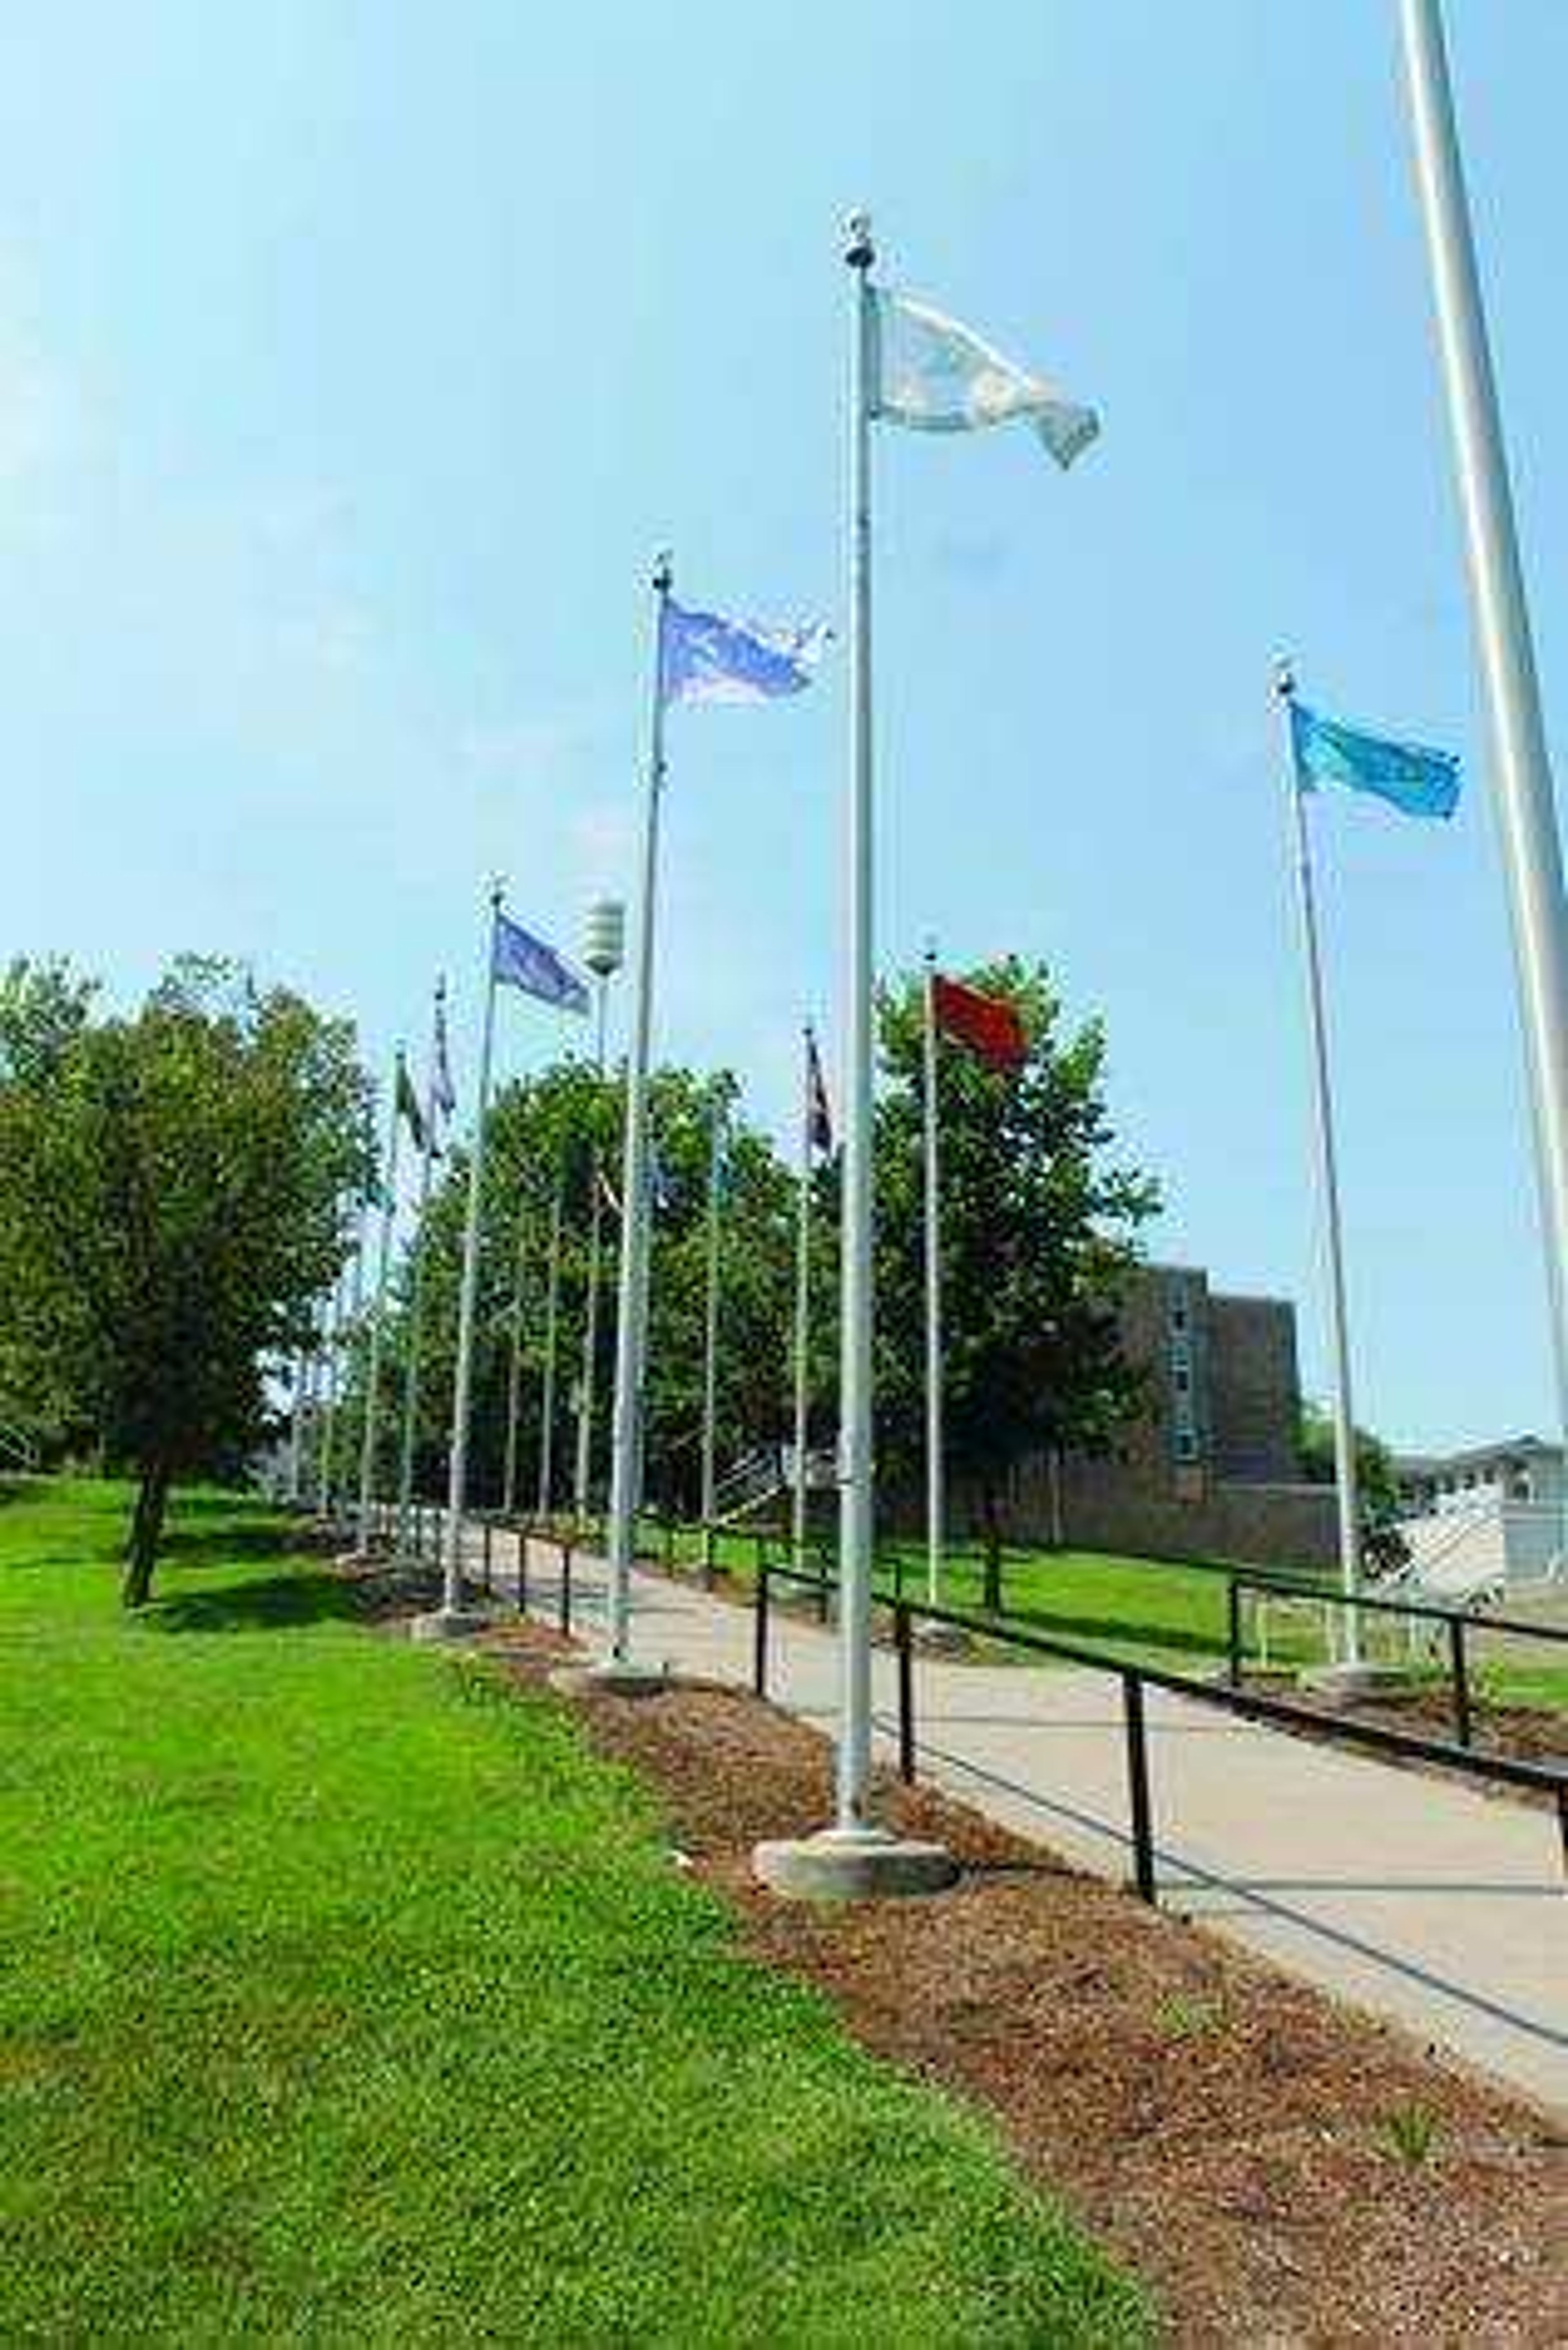 <b> Flags of fraternities and sororities on Greek Hill. </b> Photo by Drew Yount